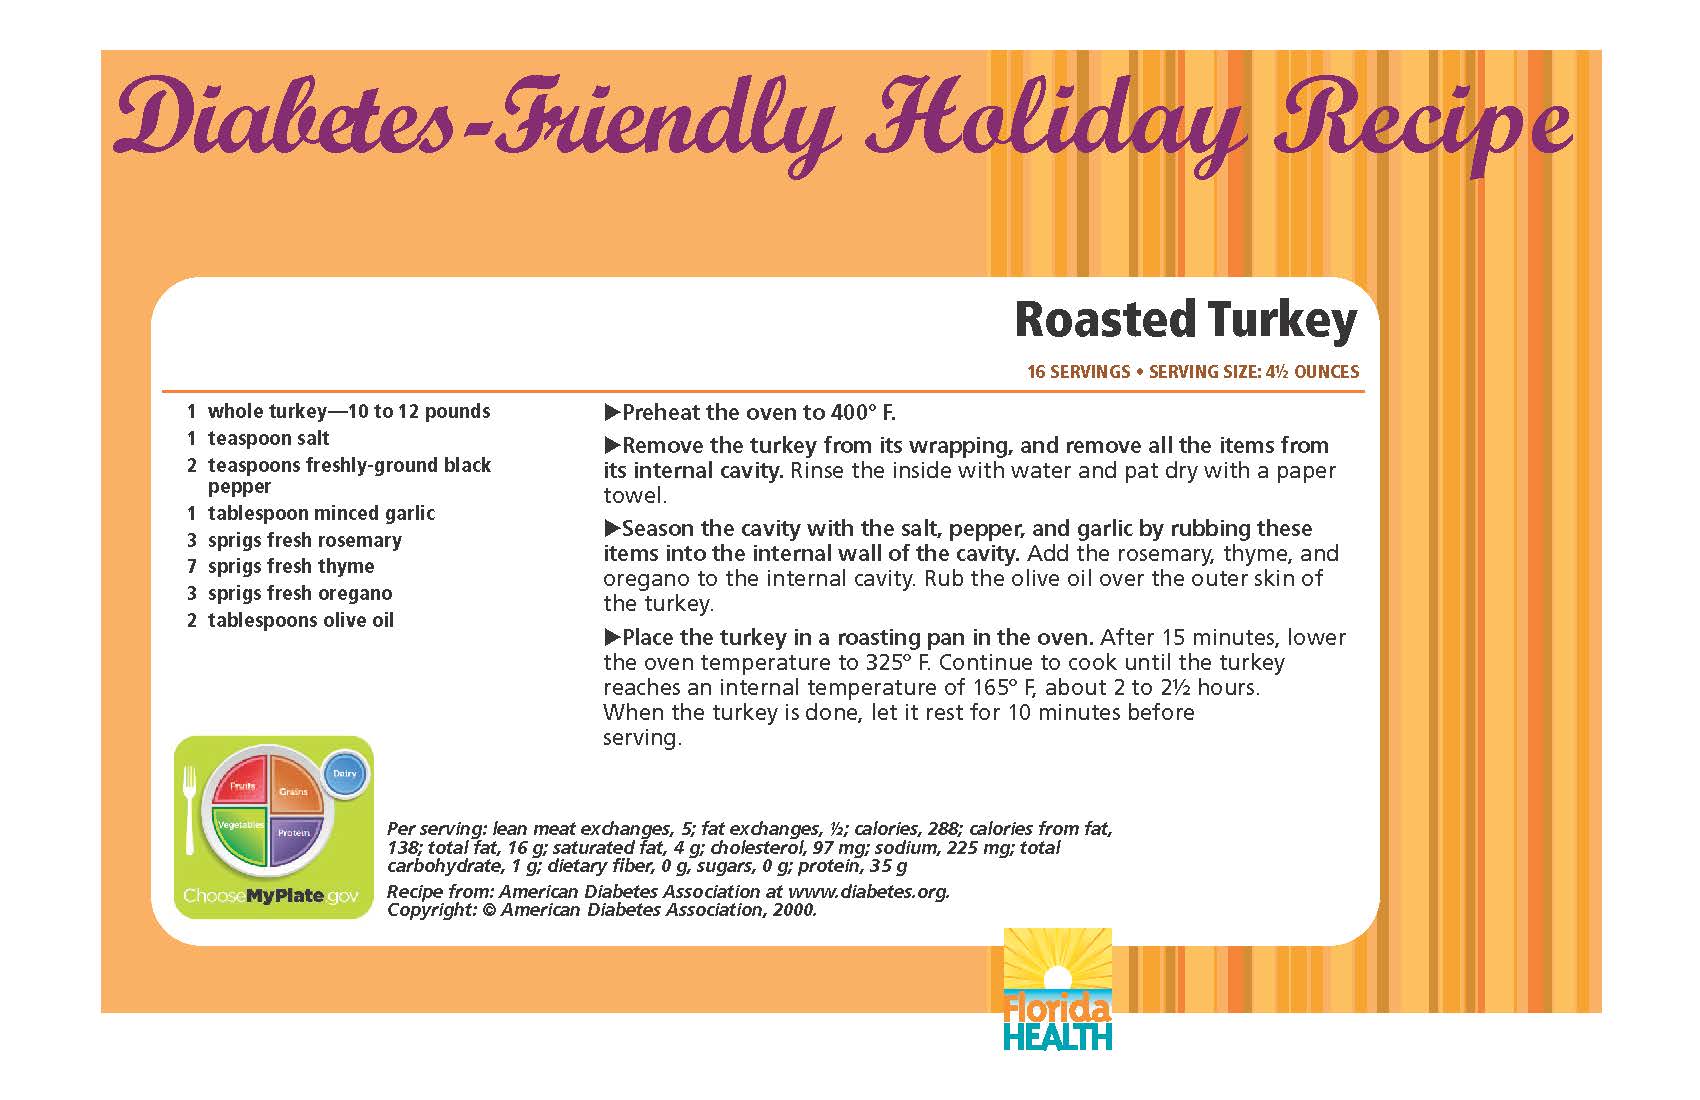 Diabetes-Friendly Holiday Recipe Roasted Turkey 16 servings • serving size: 4½ ounces 1 whole turkey—10 to 12 pounds 1 teaspoon salt 2 teaspoons freshly-ground black pepper 1 tablespoon minced garlic 3 sprigs fresh rosemary 7 sprigs fresh thyme 3 sprigs fresh oregano 2 tablespoons olive oil Roasted Turkey 16 servings • serving size: 4½ ounces Preheat the oven to 400º F. Remove the turkey from its wrapping, and remove all the items from its internal cavity. Rinse the inside with water and pat dry with a paper towel. Season the cavity with the salt, pepper, and garlic by rubbing these items into the internal wall of the cavity. Add the rosemary, thyme, and oregano to the internal cavity. Rub the olive oil over the outer skin of the turkey. Place the turkey in a roasting pan in the oven. After 15 minutes, lower the oven temperature to 325º F. Continue to cook until the turkey reaches an internal temperature of 165º F, about 2 to 2½ hours. When the turkey is done, let it rest for 10 minutes before serving. Diabetes-Friendly Holiday Recipe Per serving: lean meat exchanges, 5; fat exchanges, ½; calories, 288; calories from fat, 138; total fat, 16 g; saturated fat, 4 g; cholesterol, 97 mg; sodium, 225 mg; total carbohydrate, 1 g; dietary fiber, 0 g, sugars, 0 g; protein, 35 g Recipe from: American Diabetes Association at www.diabetes.org. Copyright: © American Diabetes Association, 2000.